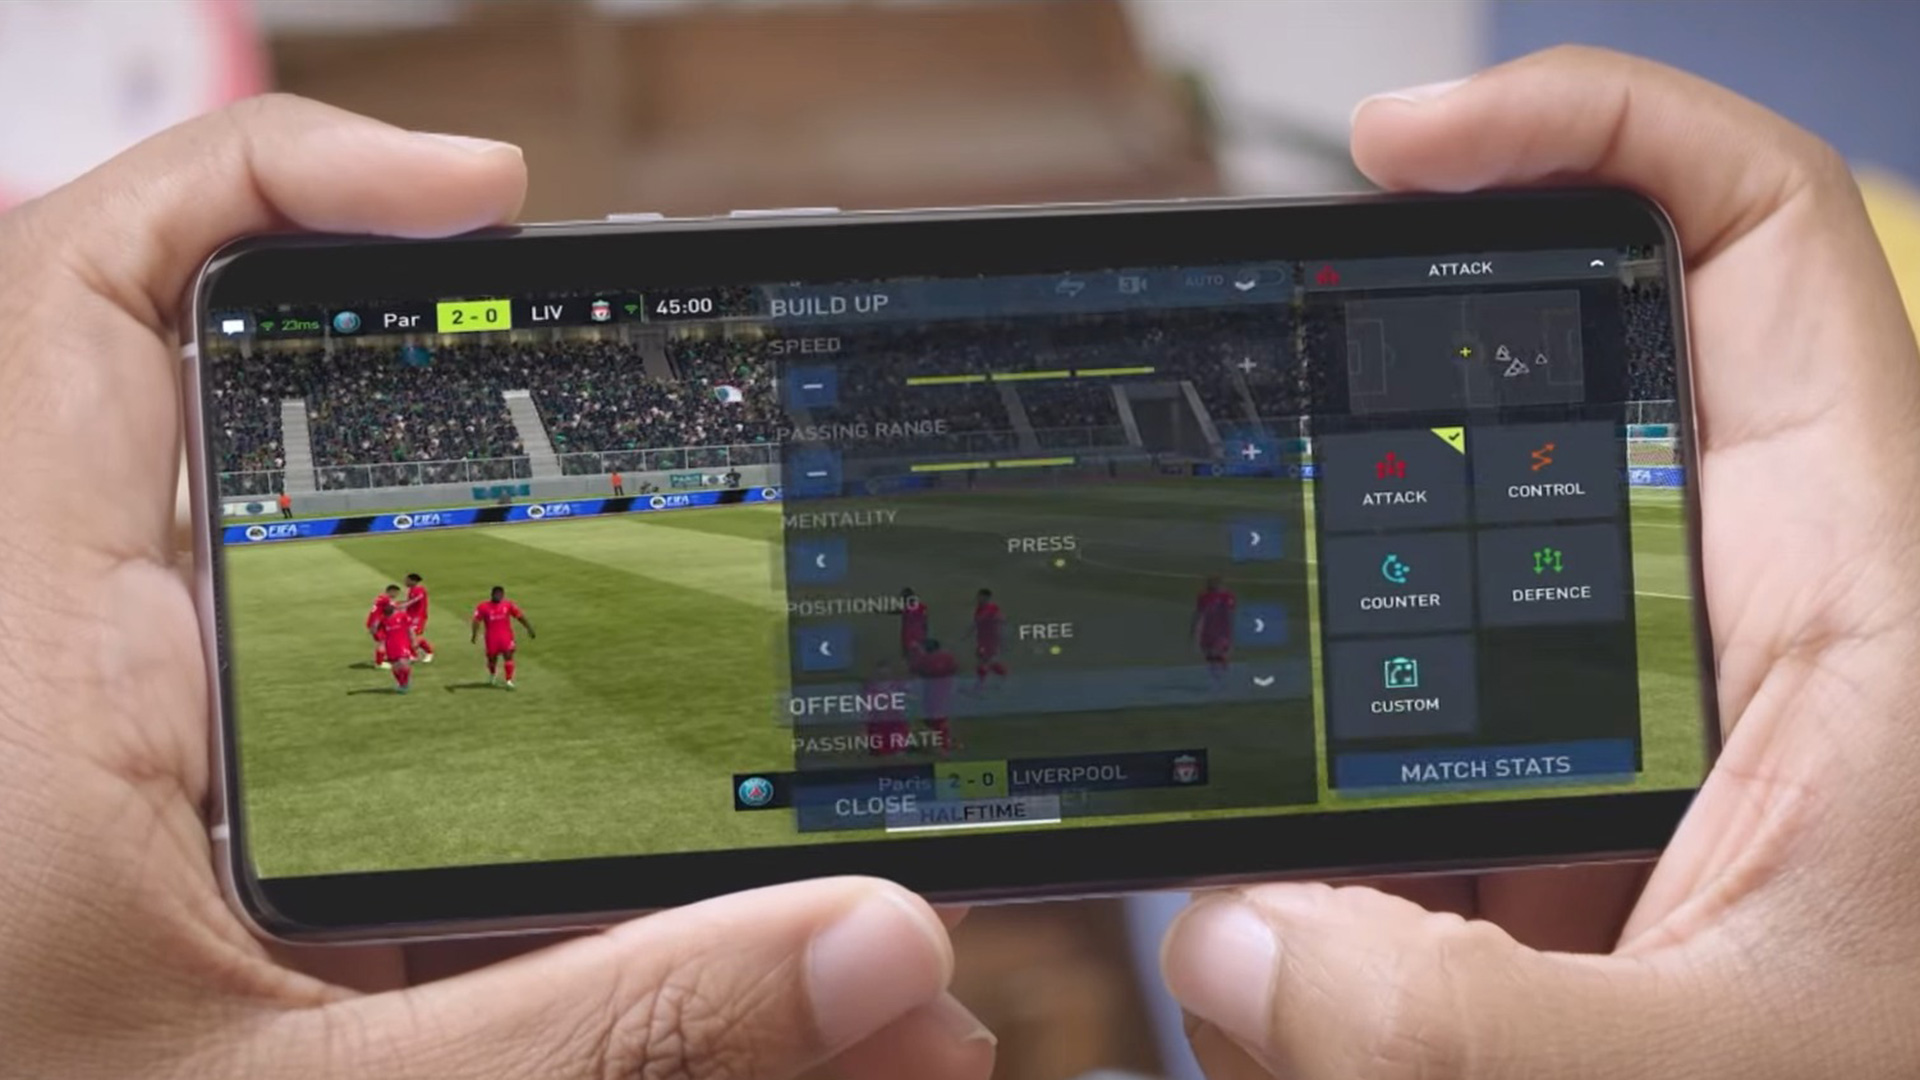 new-fifa-mobile-mode-puts-the-focus-on-strategy-not-action-or-engadget